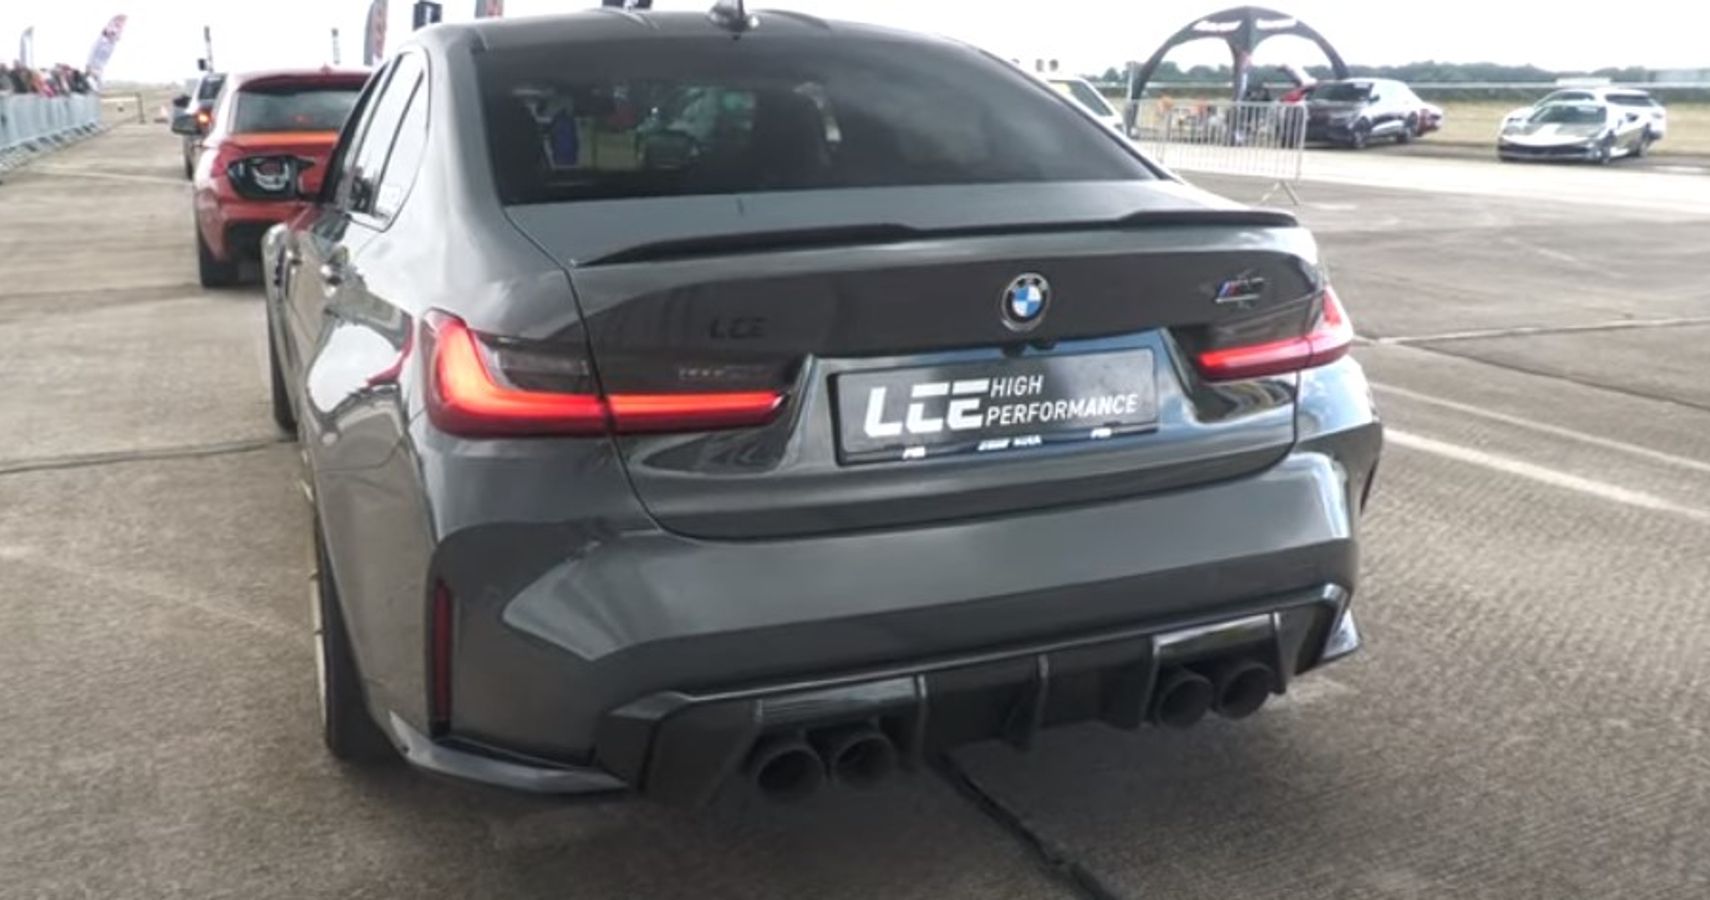 Automotive Mike YouTube Channel BMW M3 LCE rear view